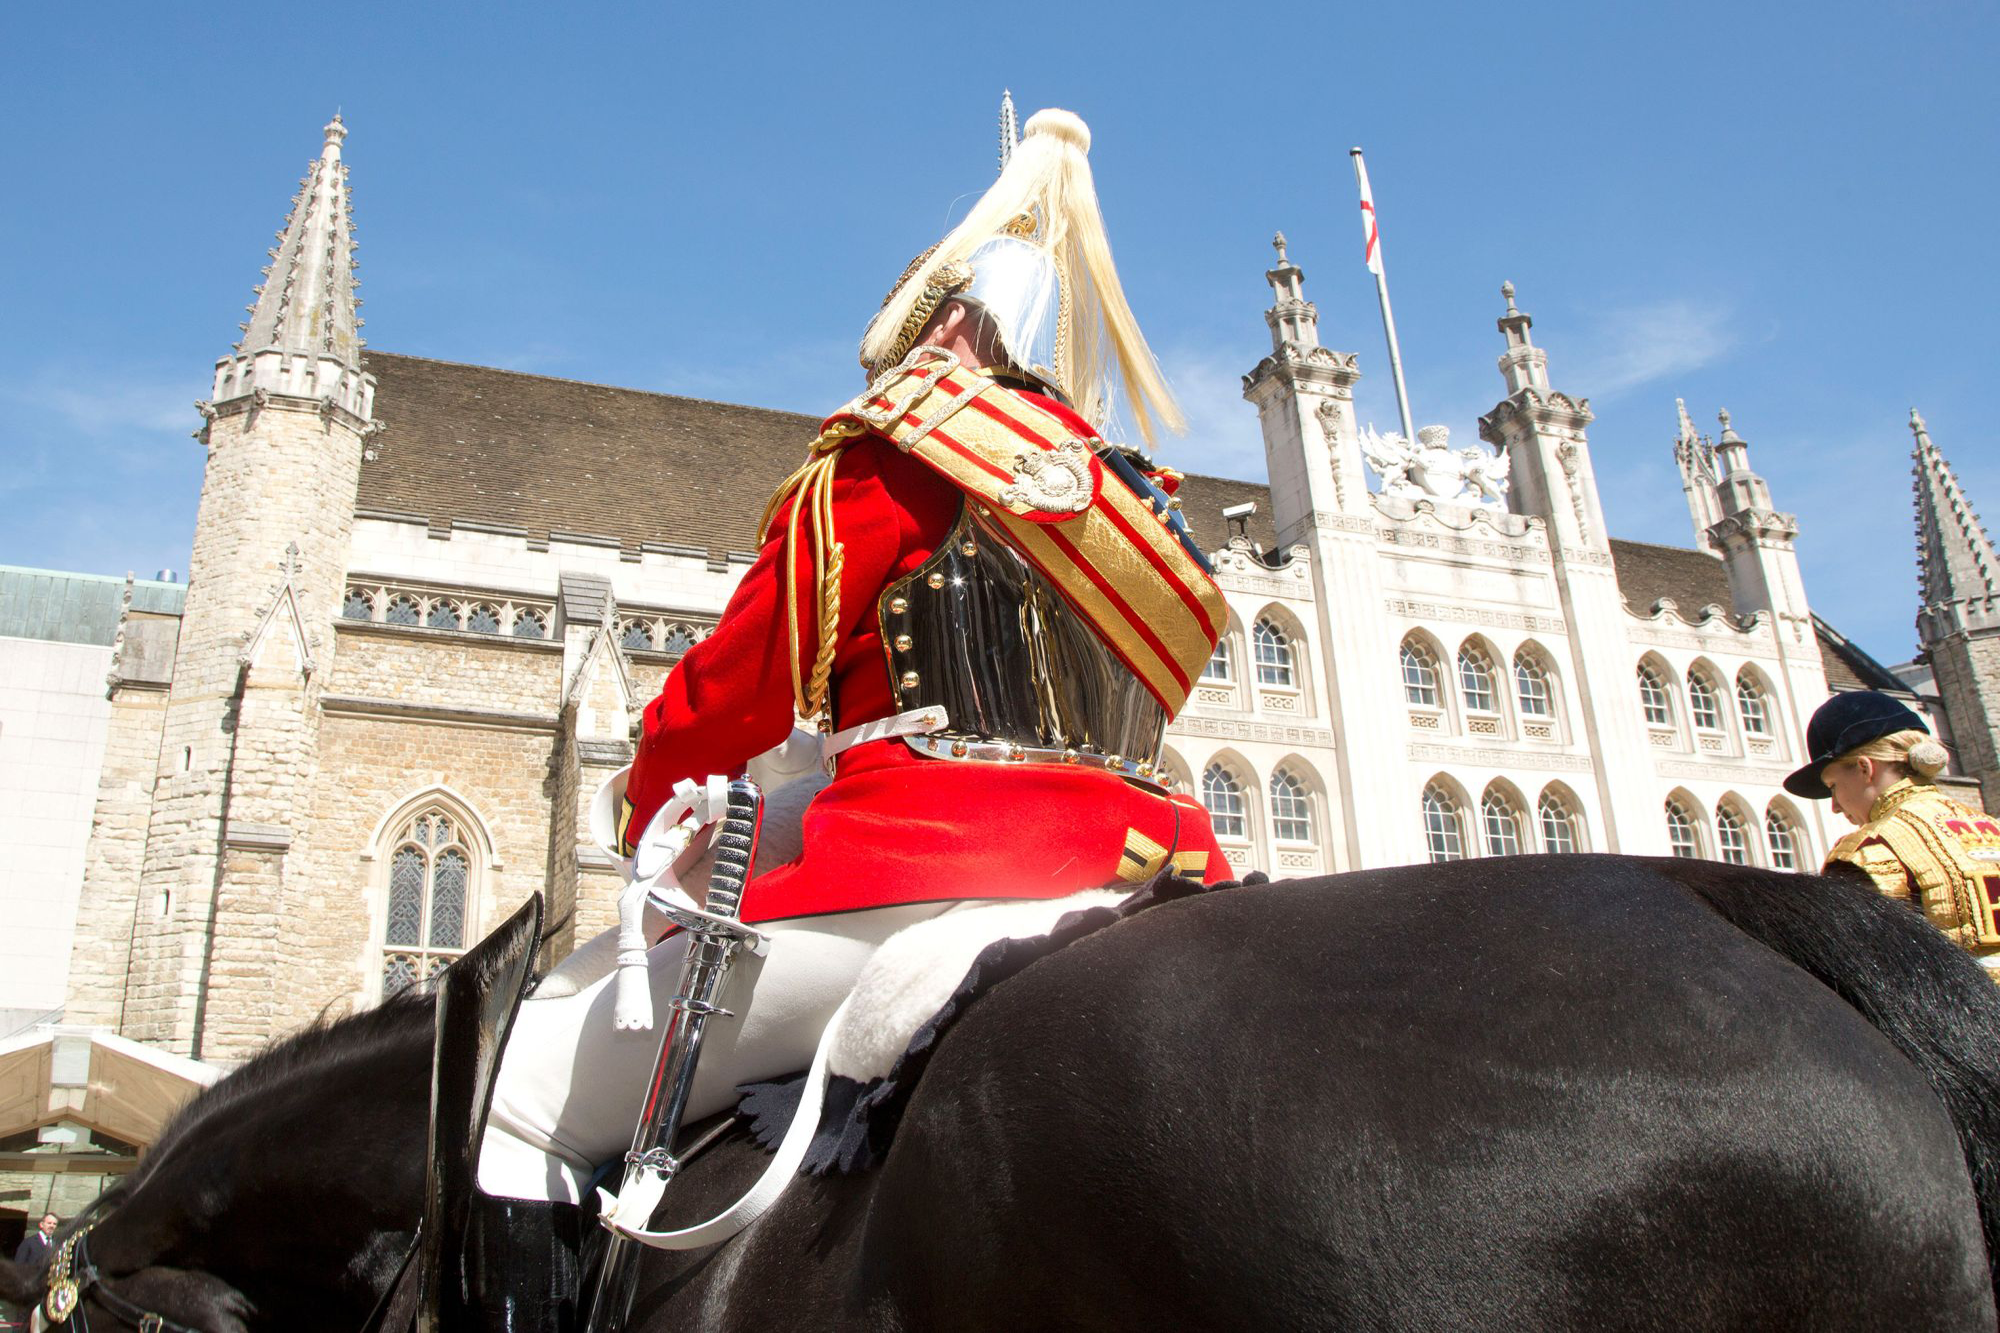 Royal Guard dressed in uniform, riding a black horse outside The Guildhall